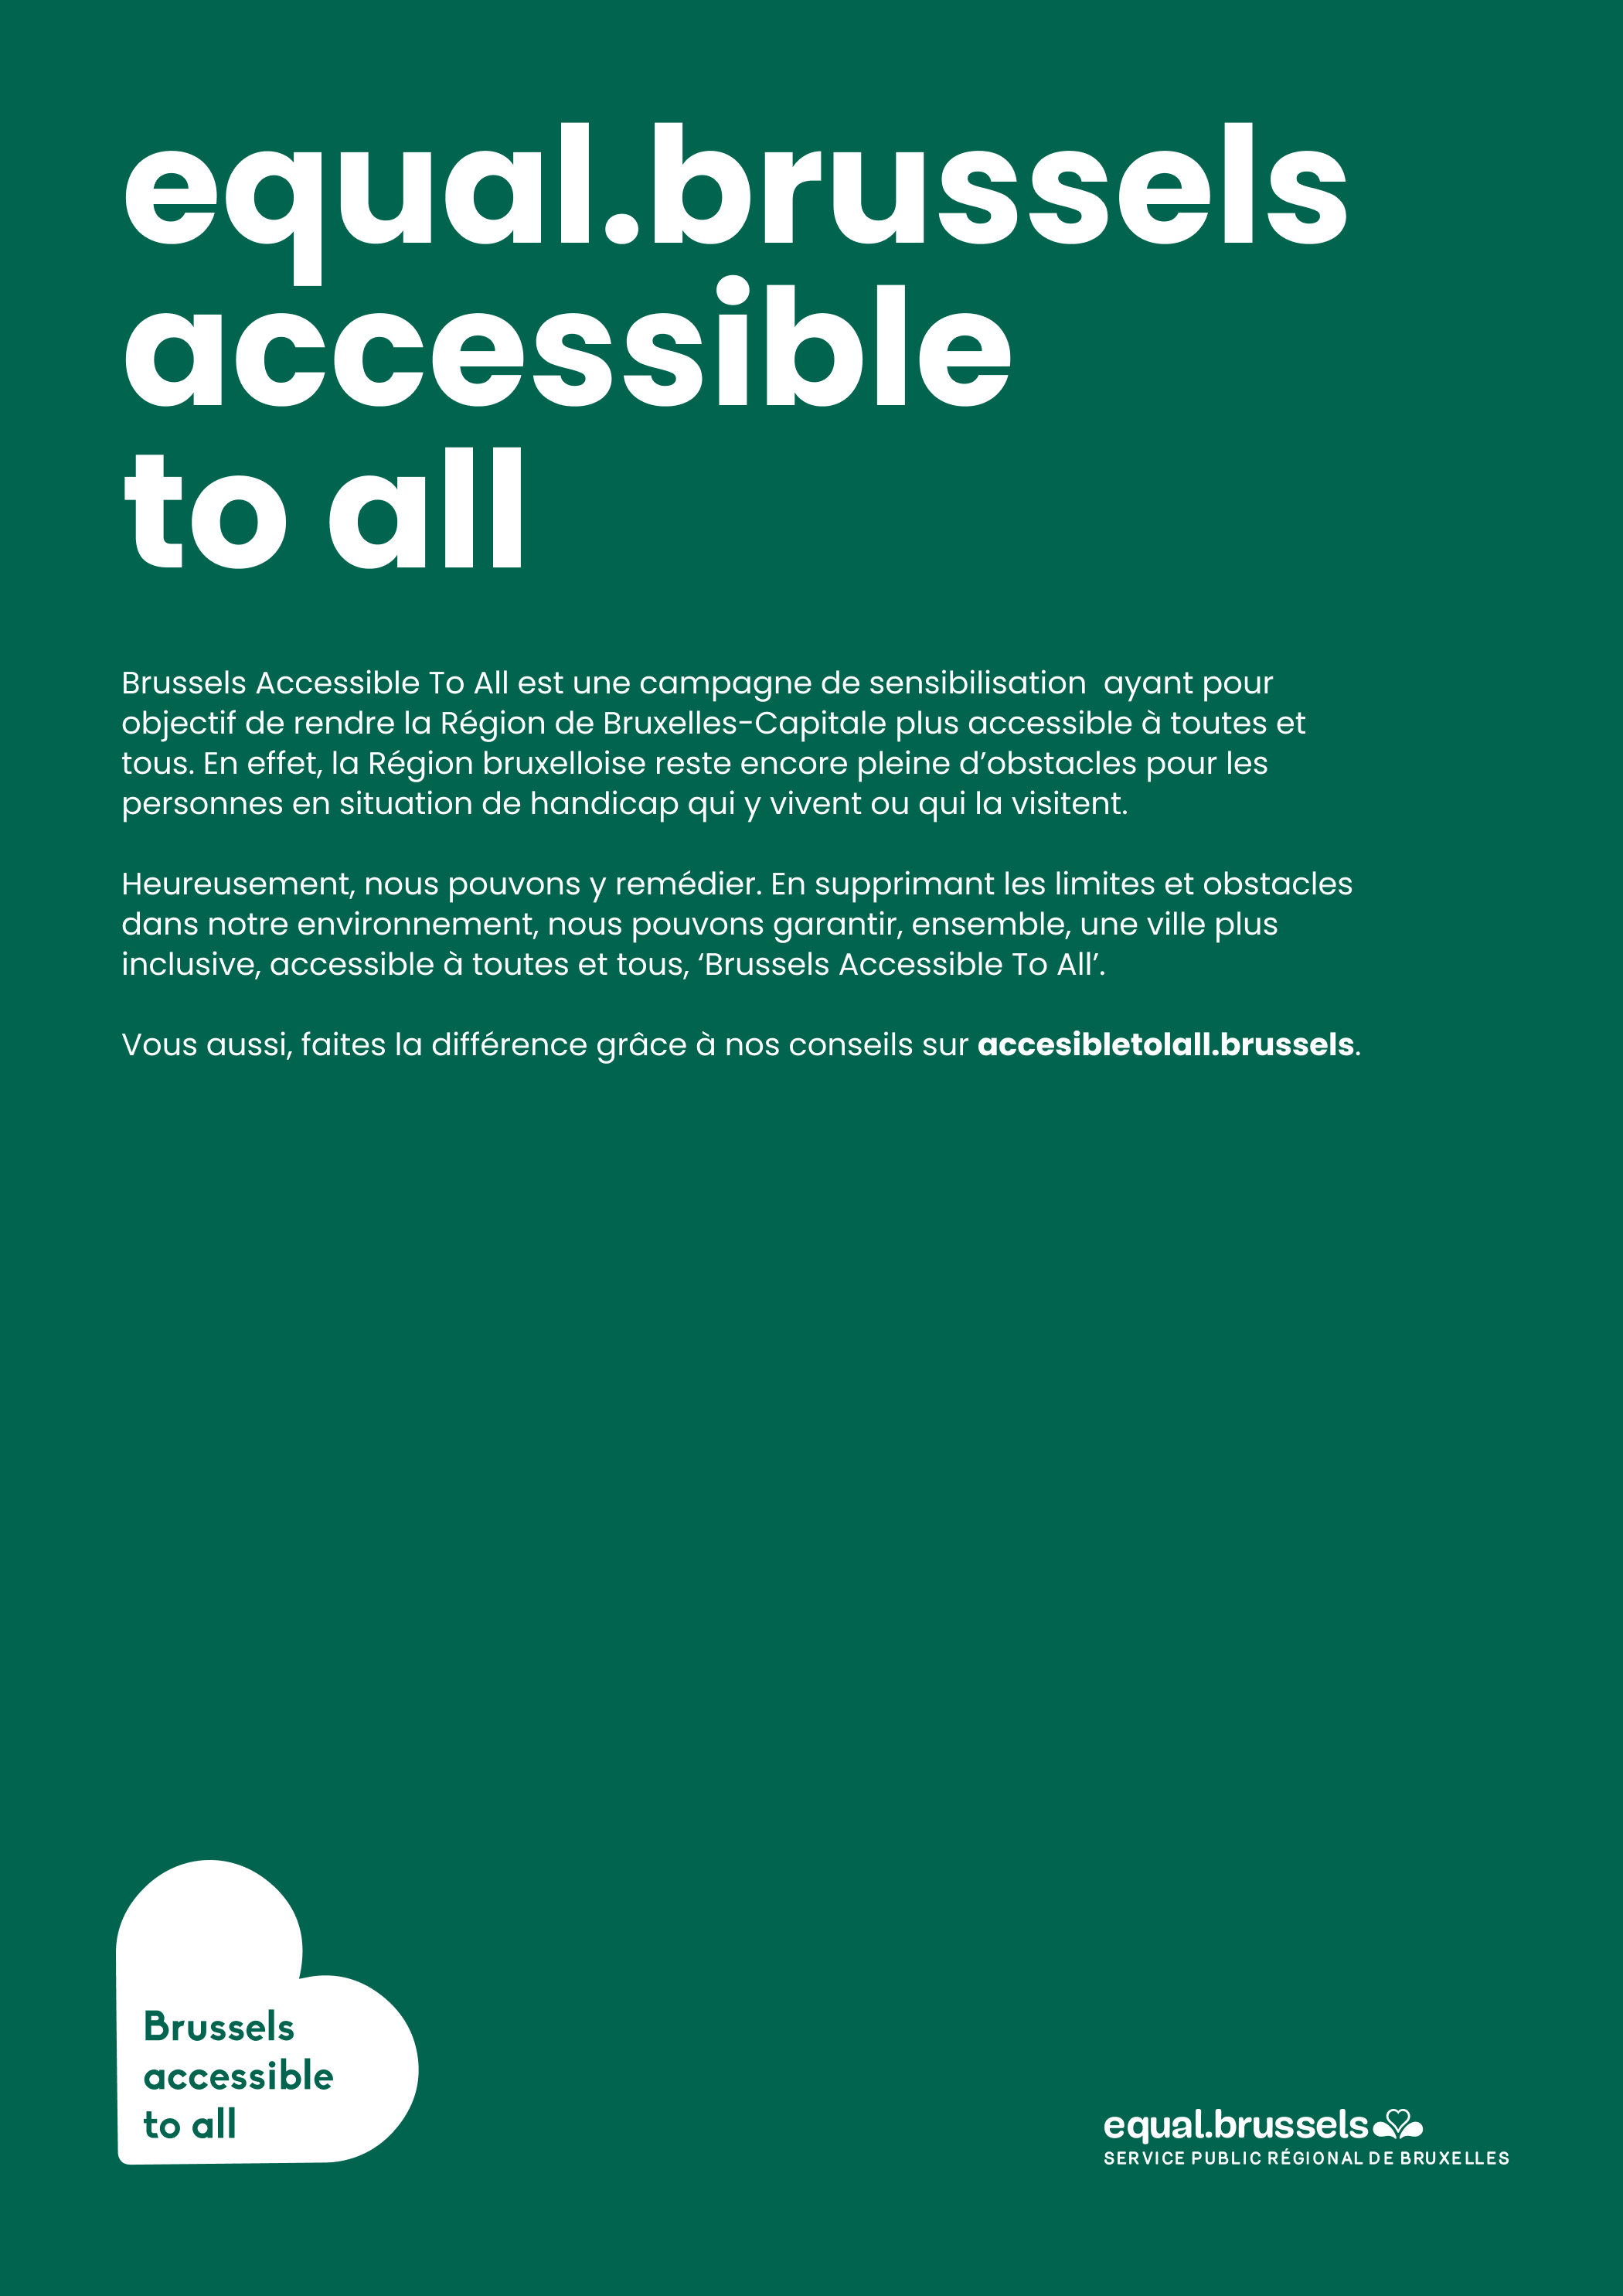 Brussels accesible to all poster